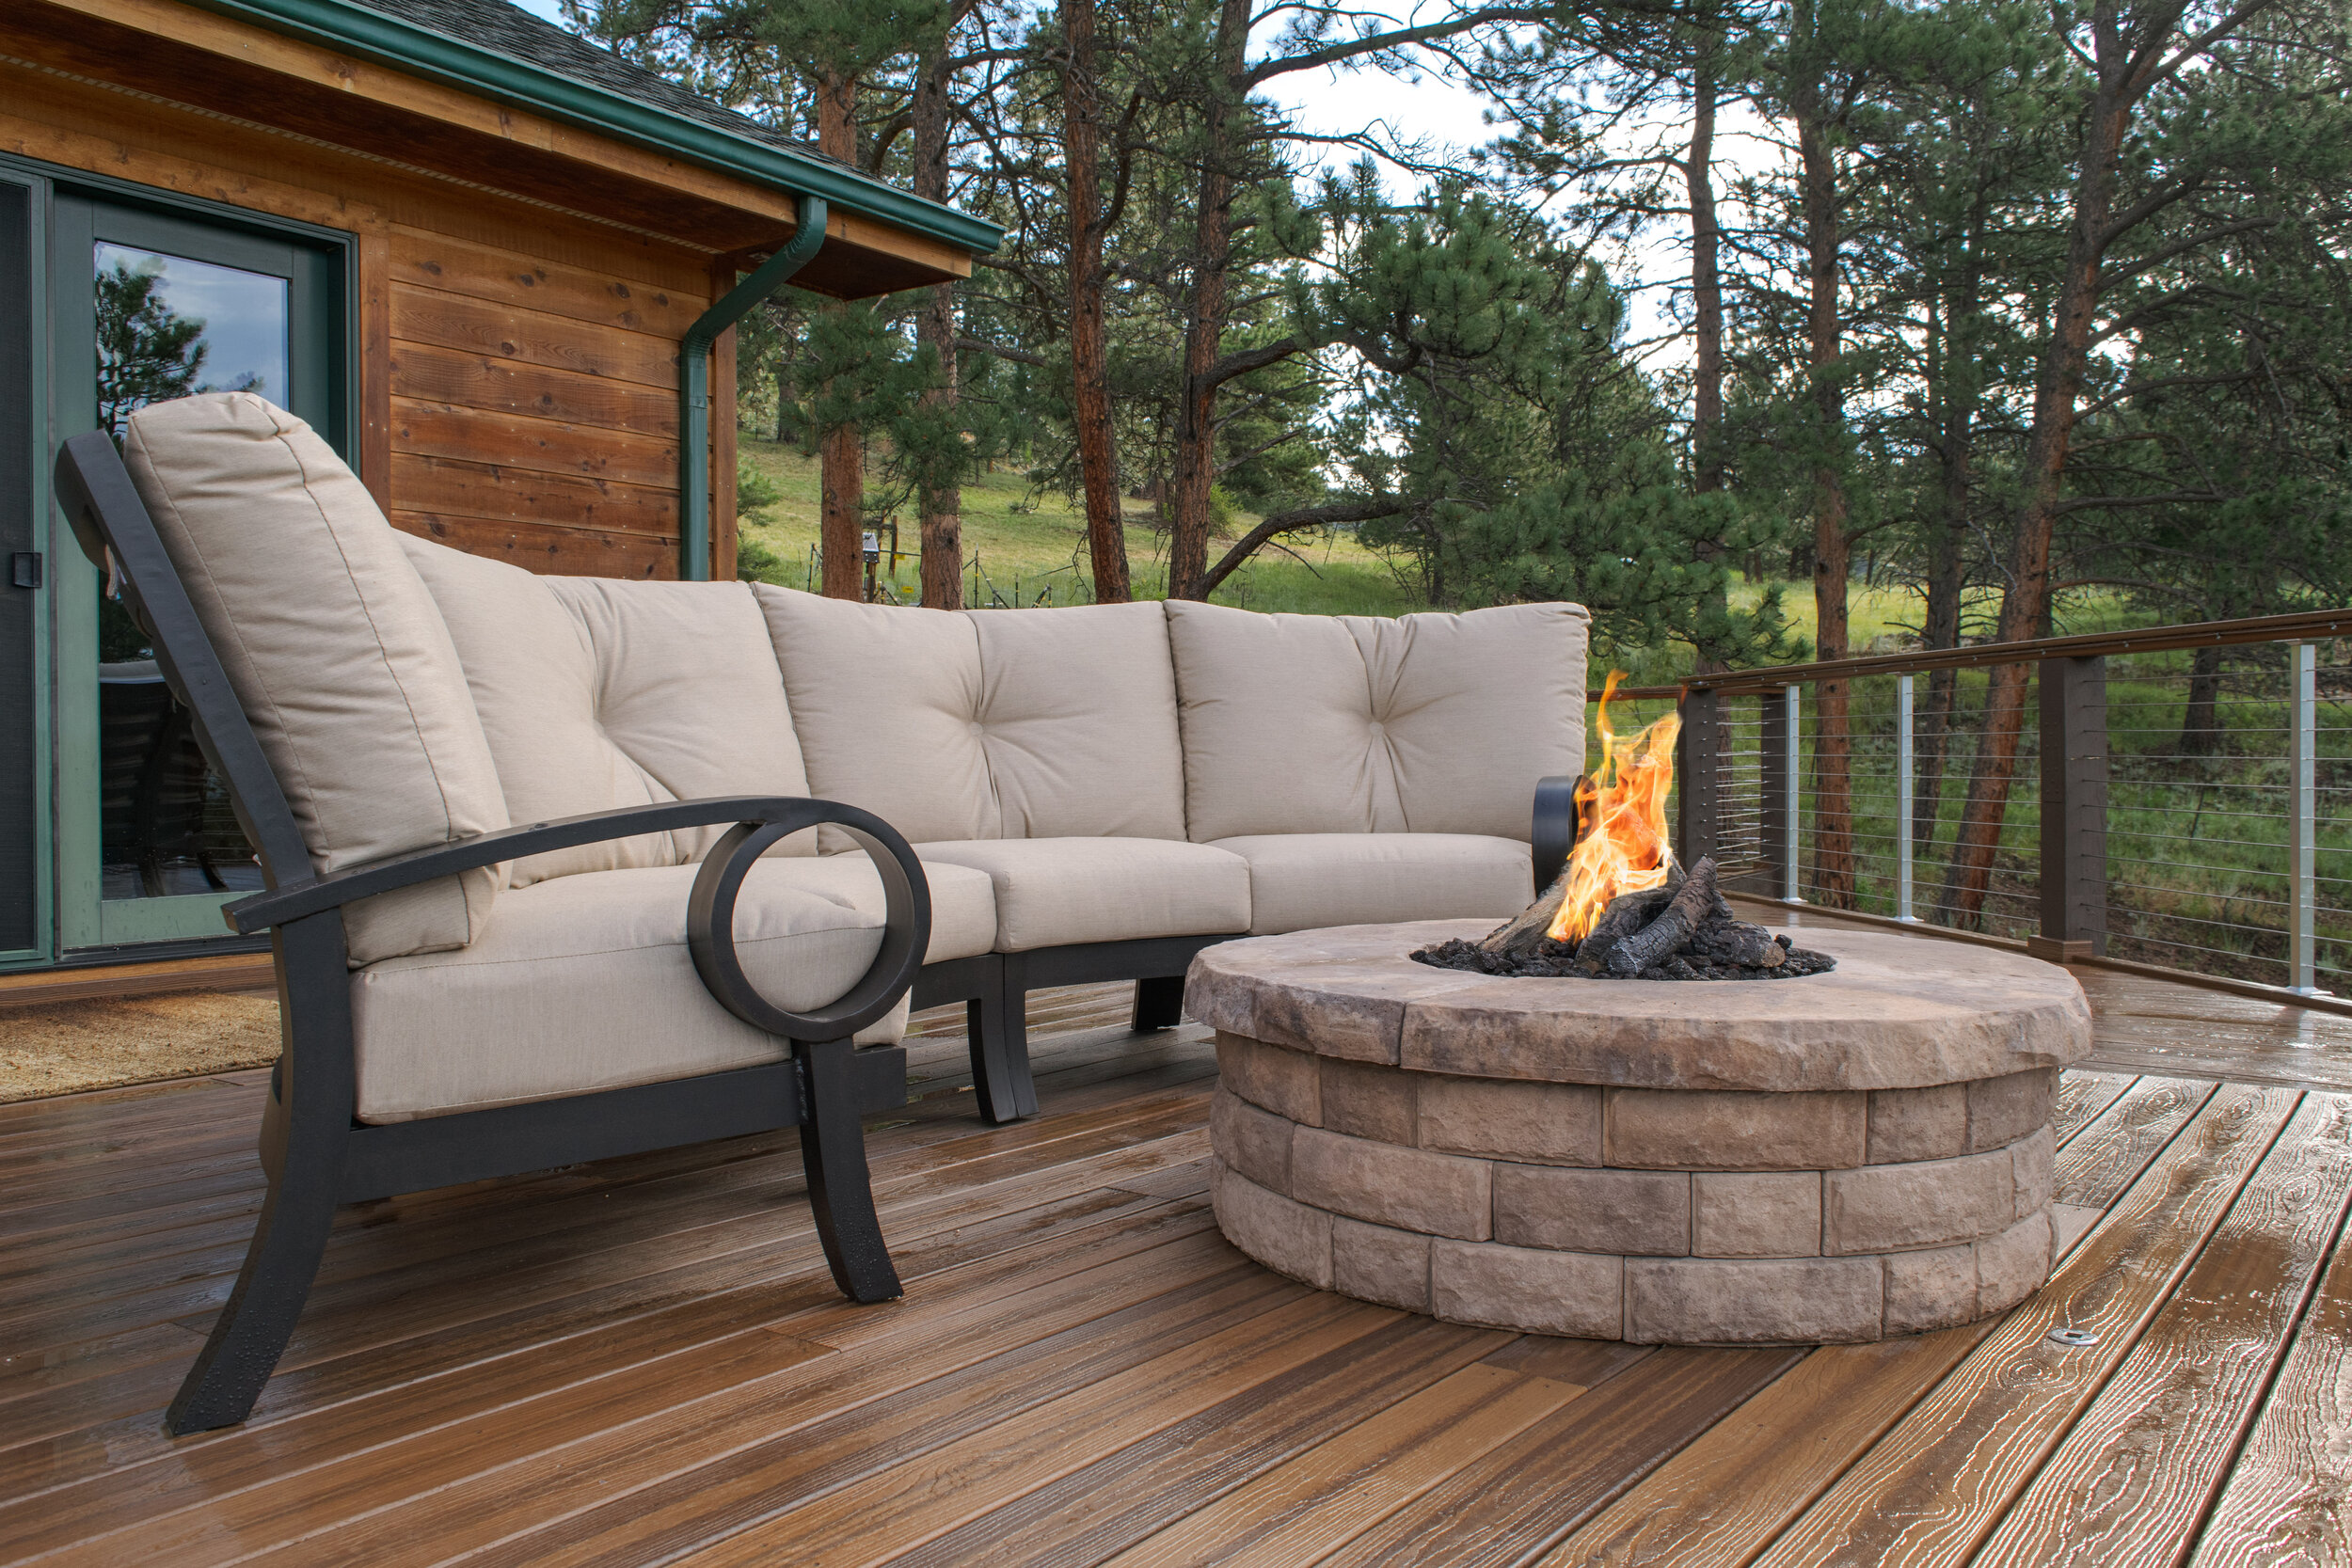 Outdoor Space With A Gas Fire Pit, Built In Fire Pit On Deck